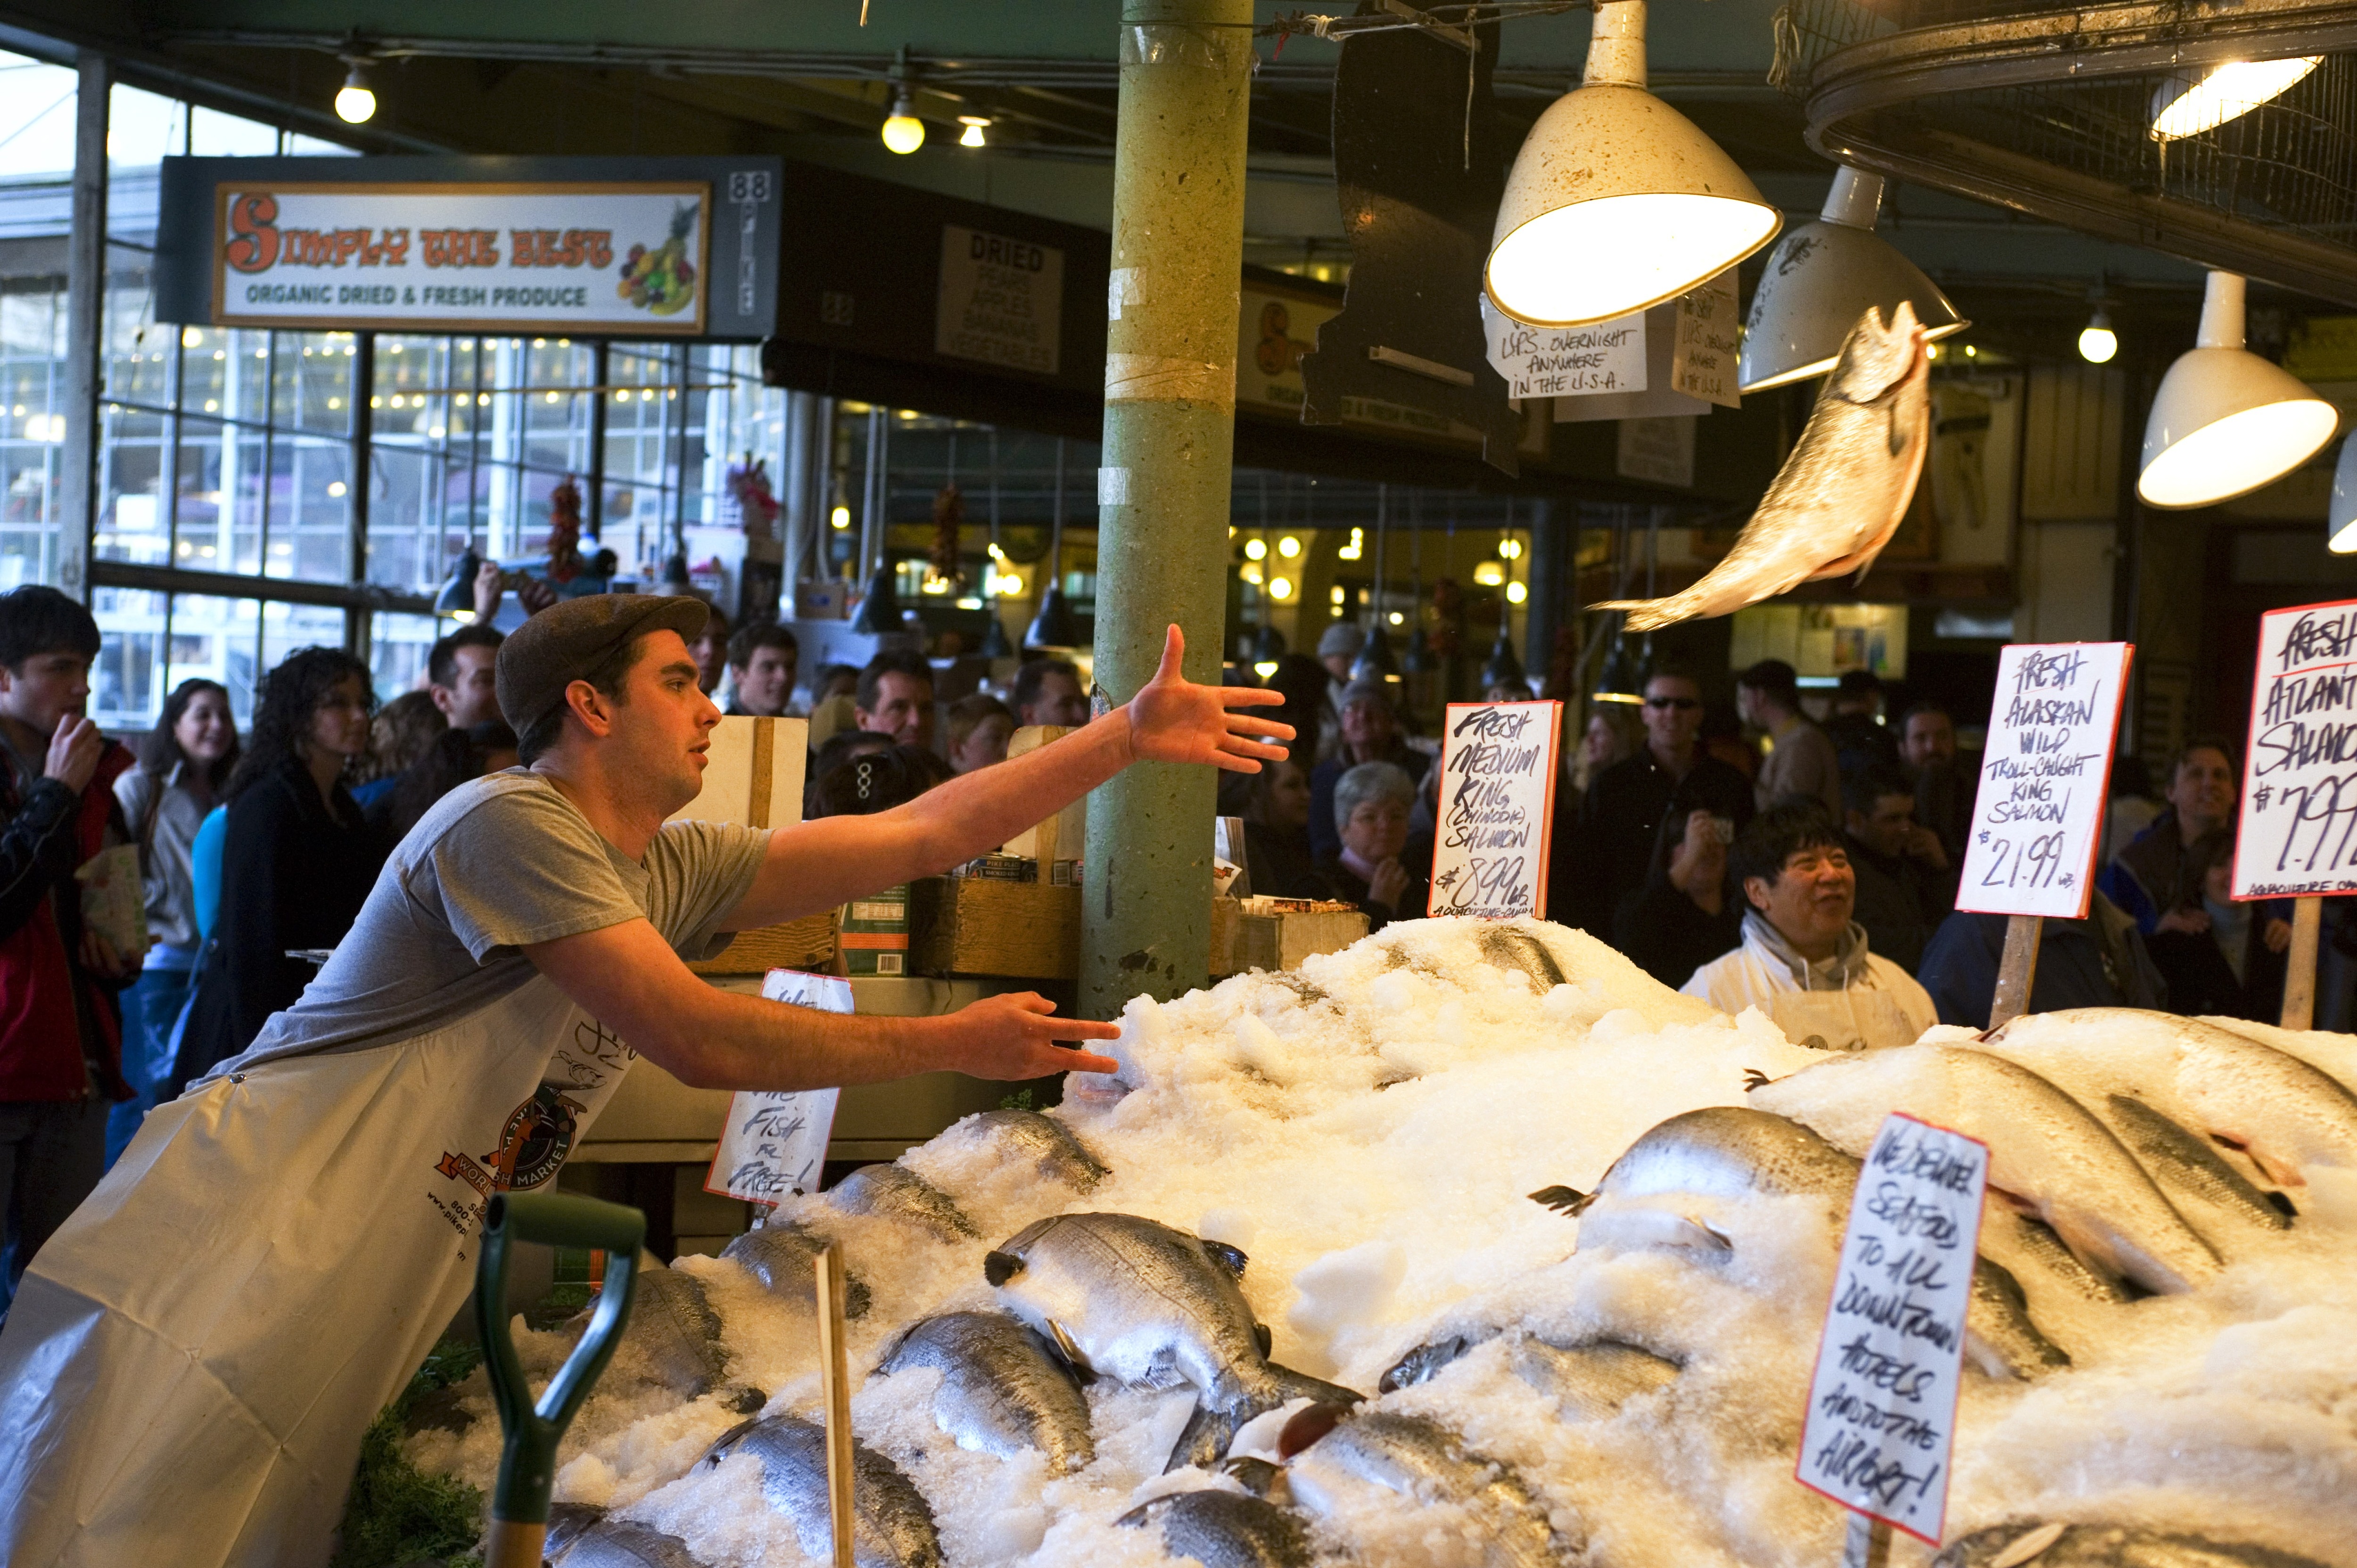 A worker at a fish market throws a fish in the air.